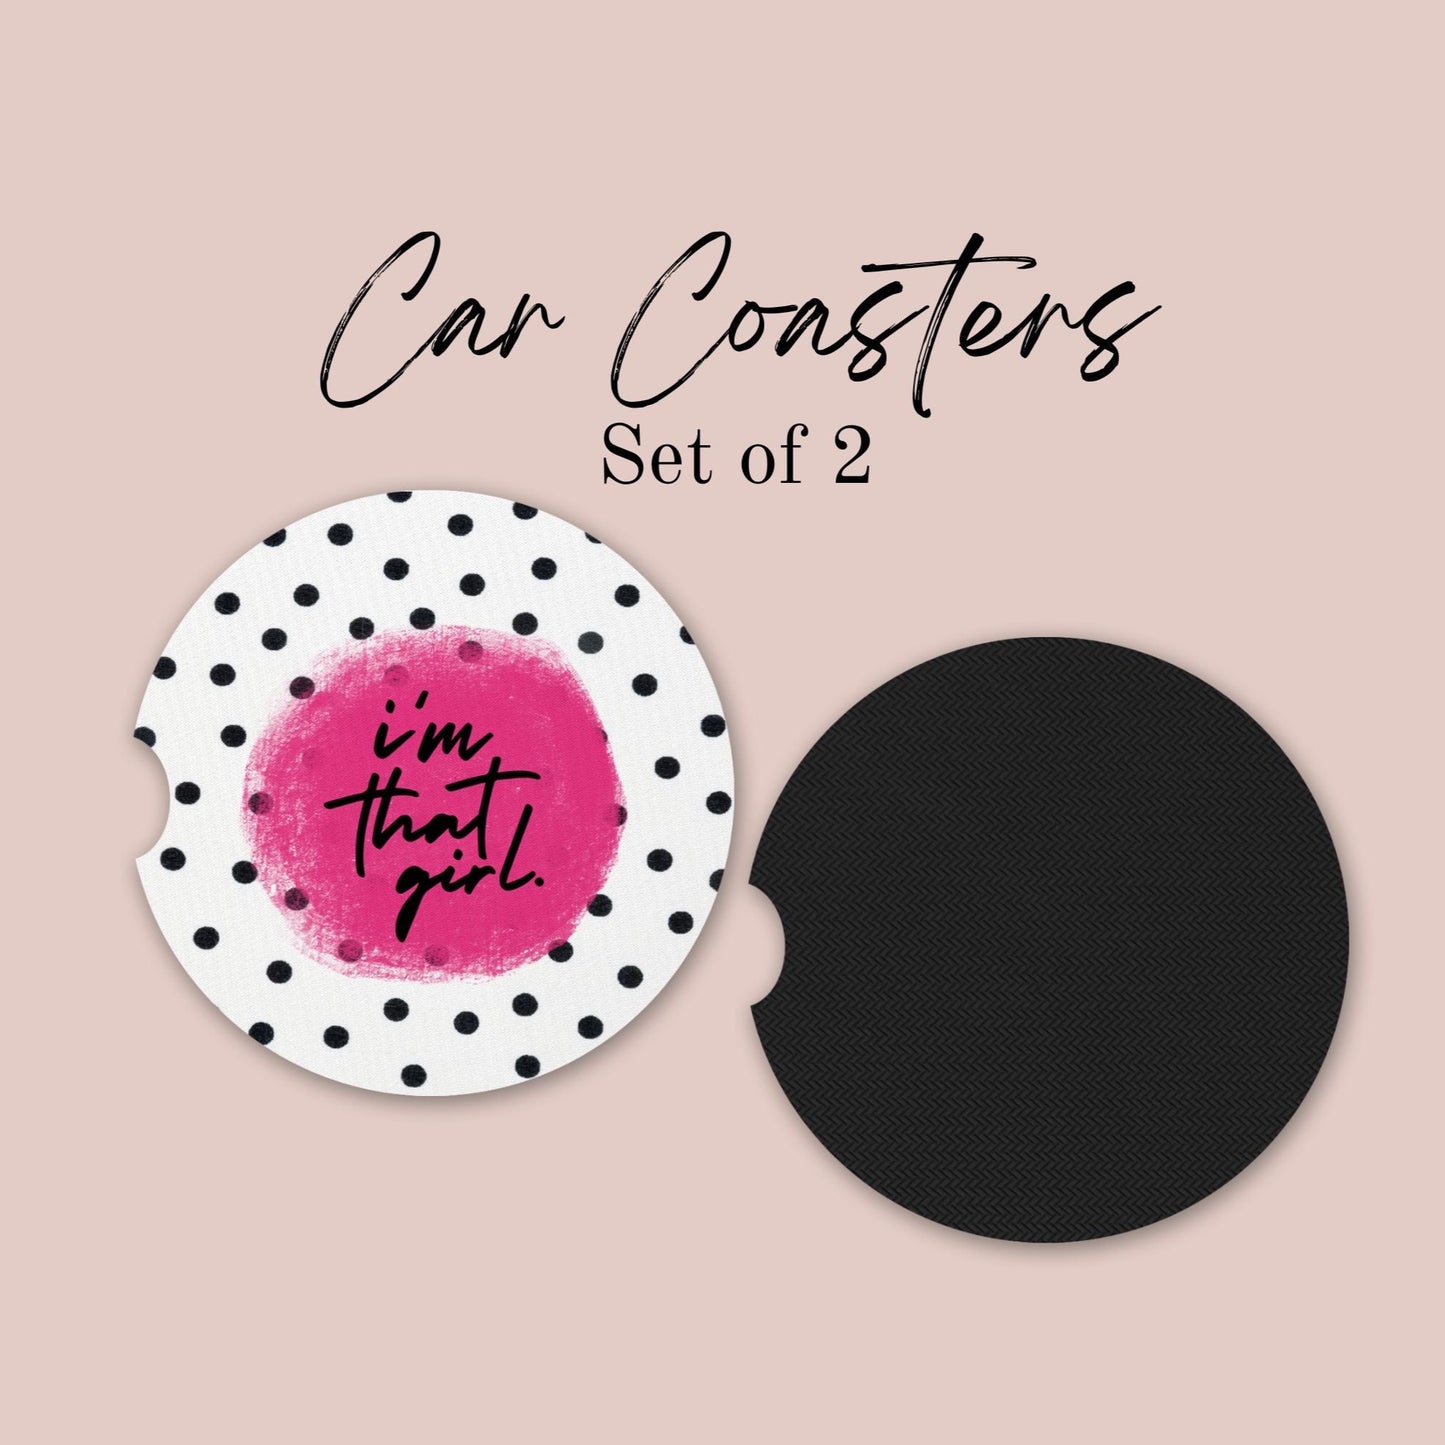 Im That Girl Car Coasters with Polka Dots to Keep Car Clean